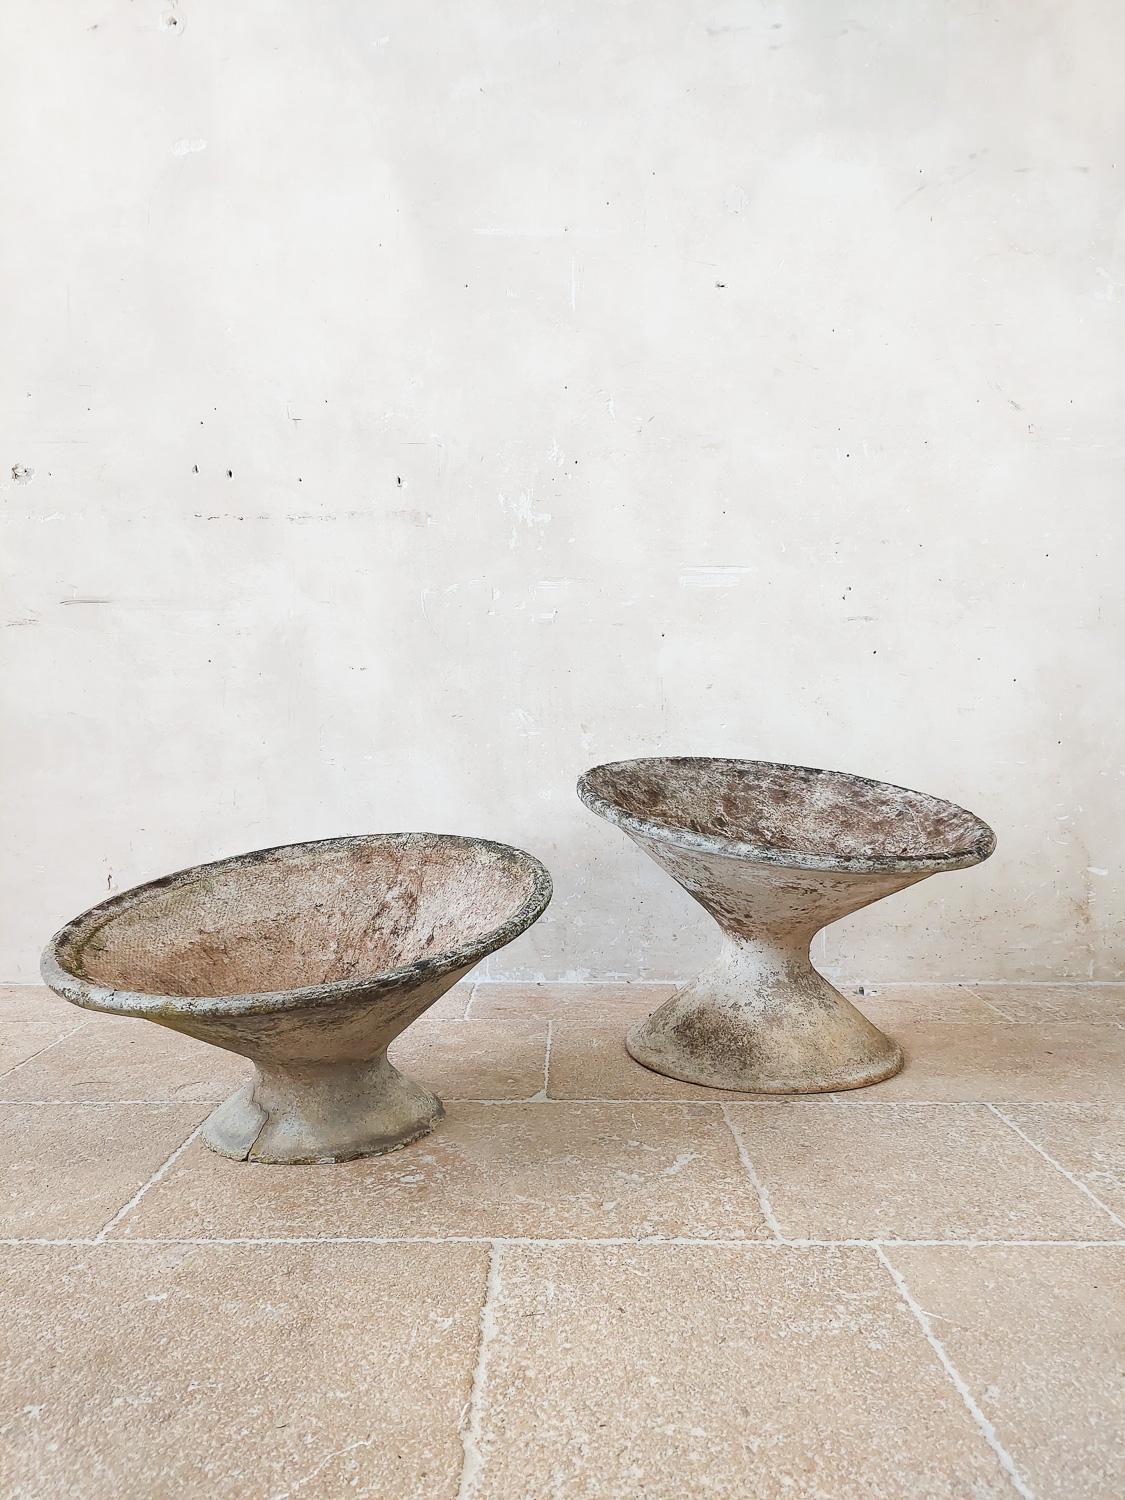 Set of two tilted concrete planters by the Swiss architect Willy Guhl. Beautiful patina and color. Great vintage planters or stand alone sculptures for indoor or outdoor use.

Some small damaging to one foot due to age, see photos

Measures: